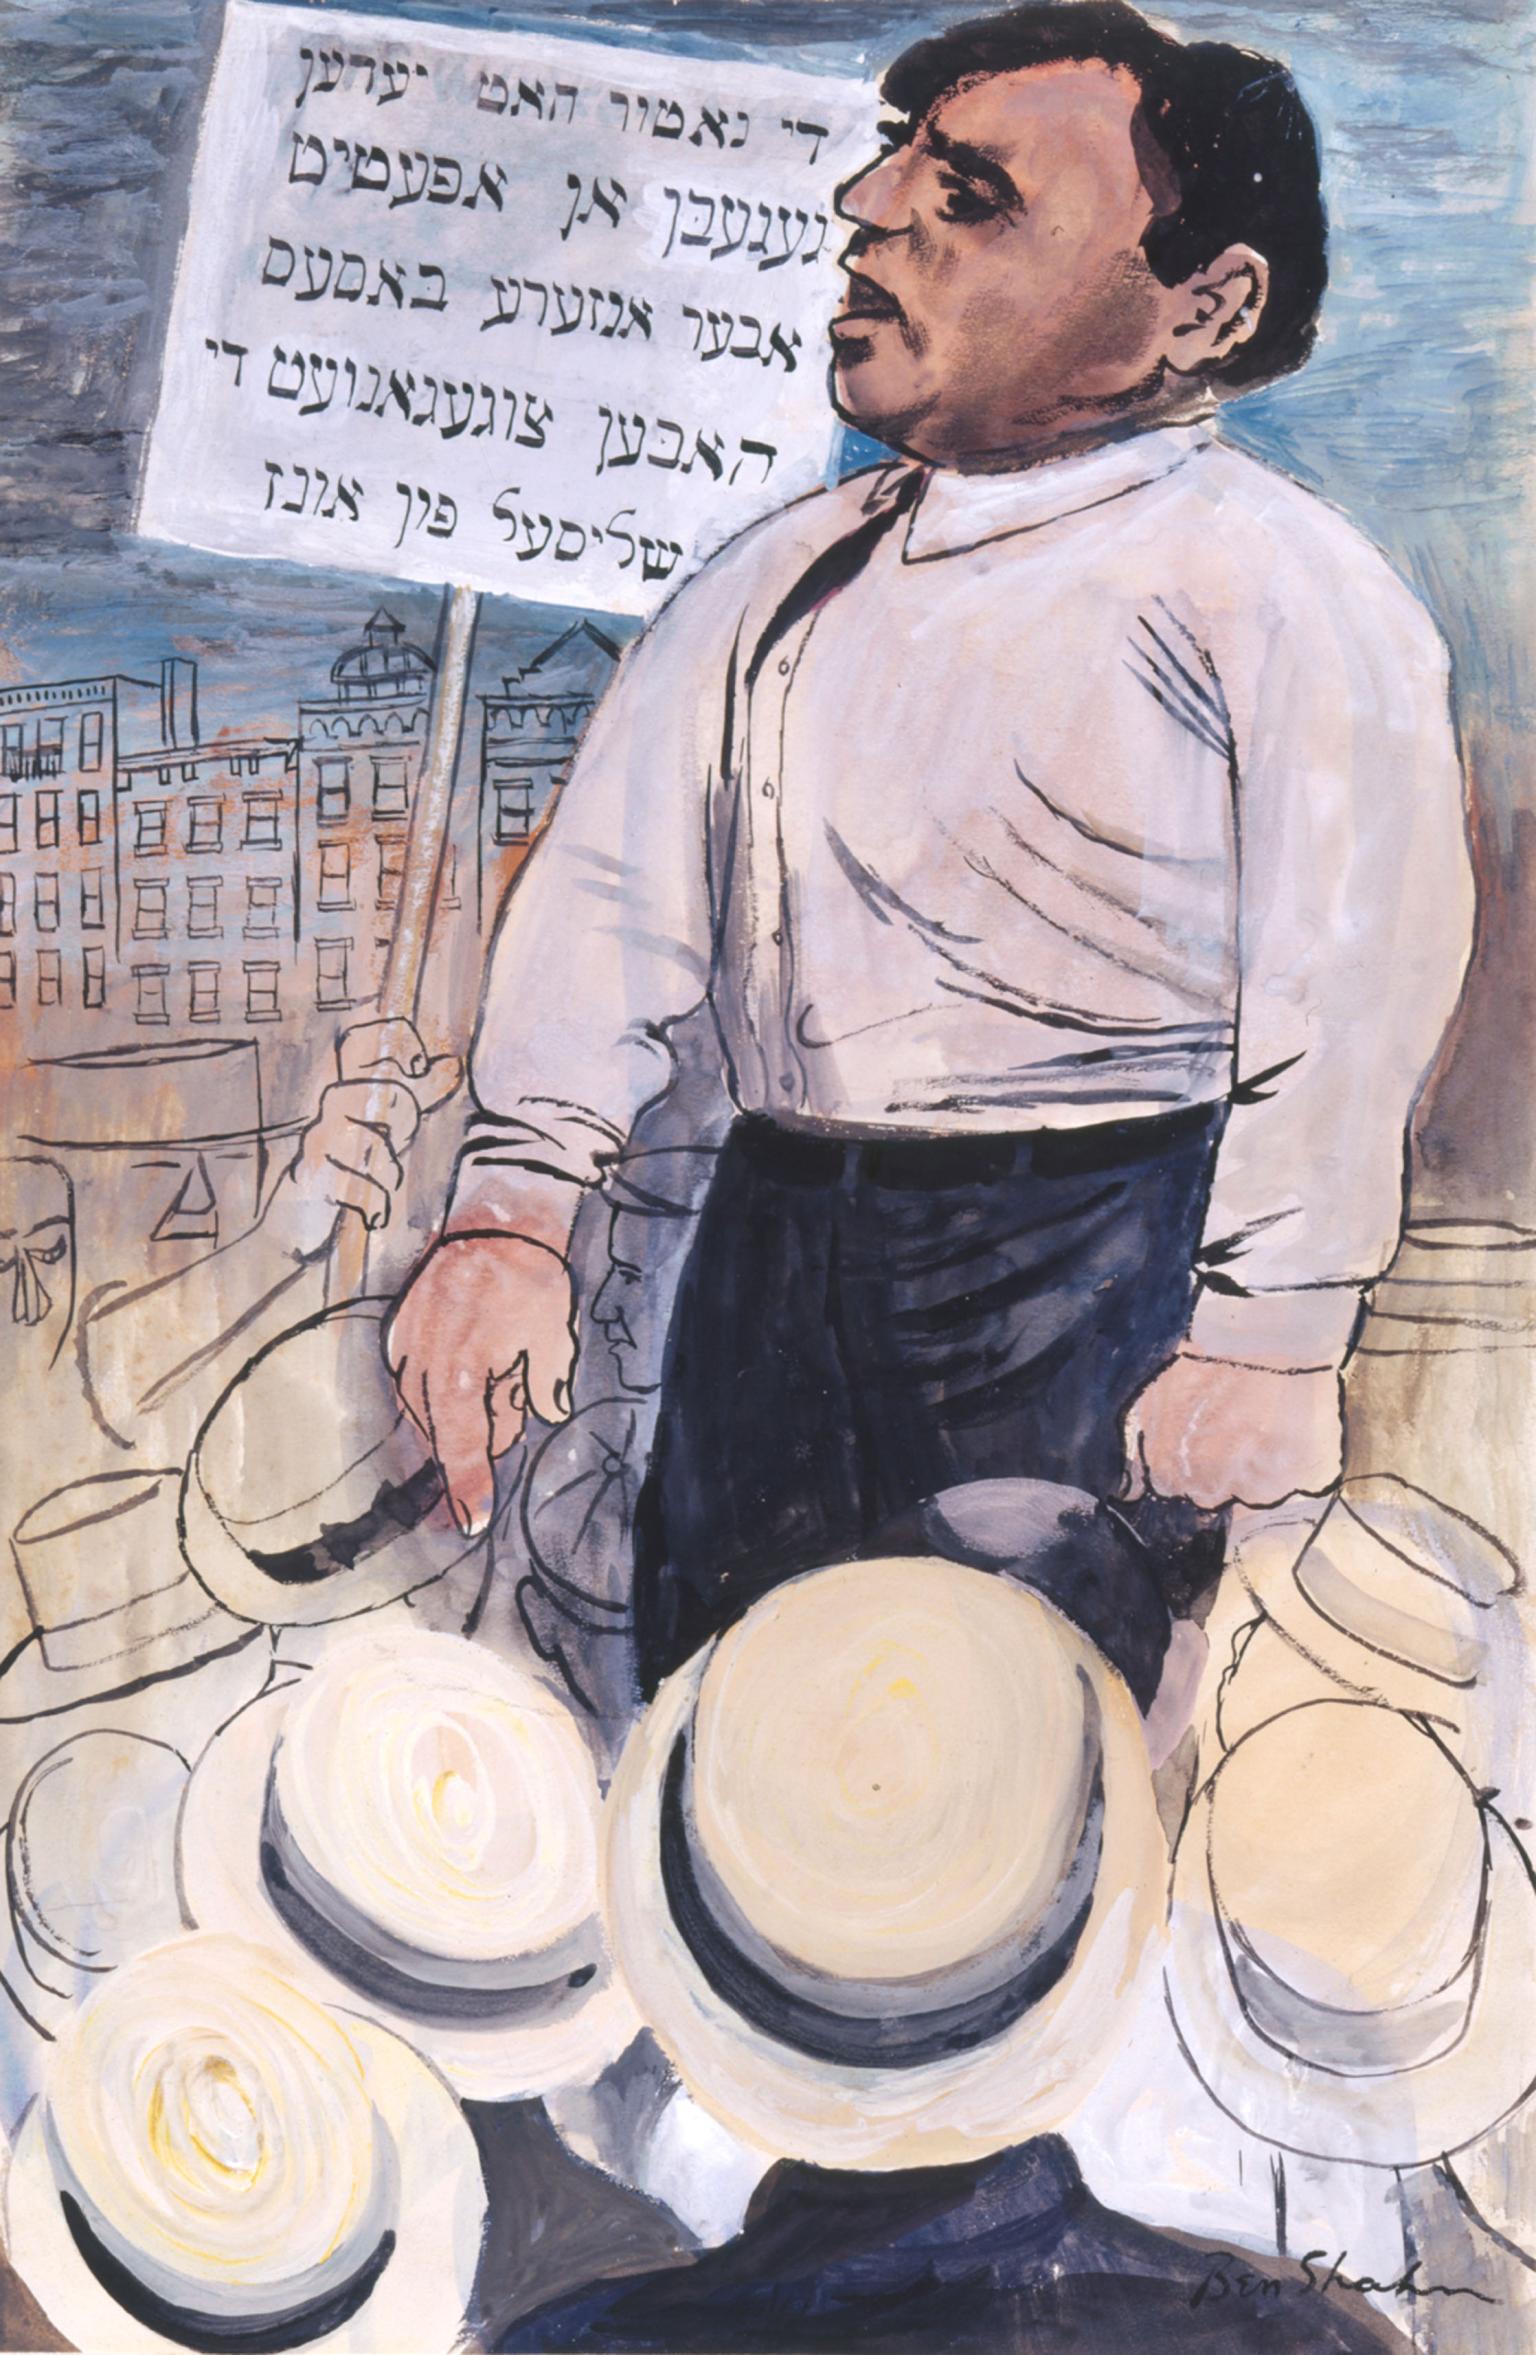 Painting of man addressing audience holding a sign of Yiddish text.